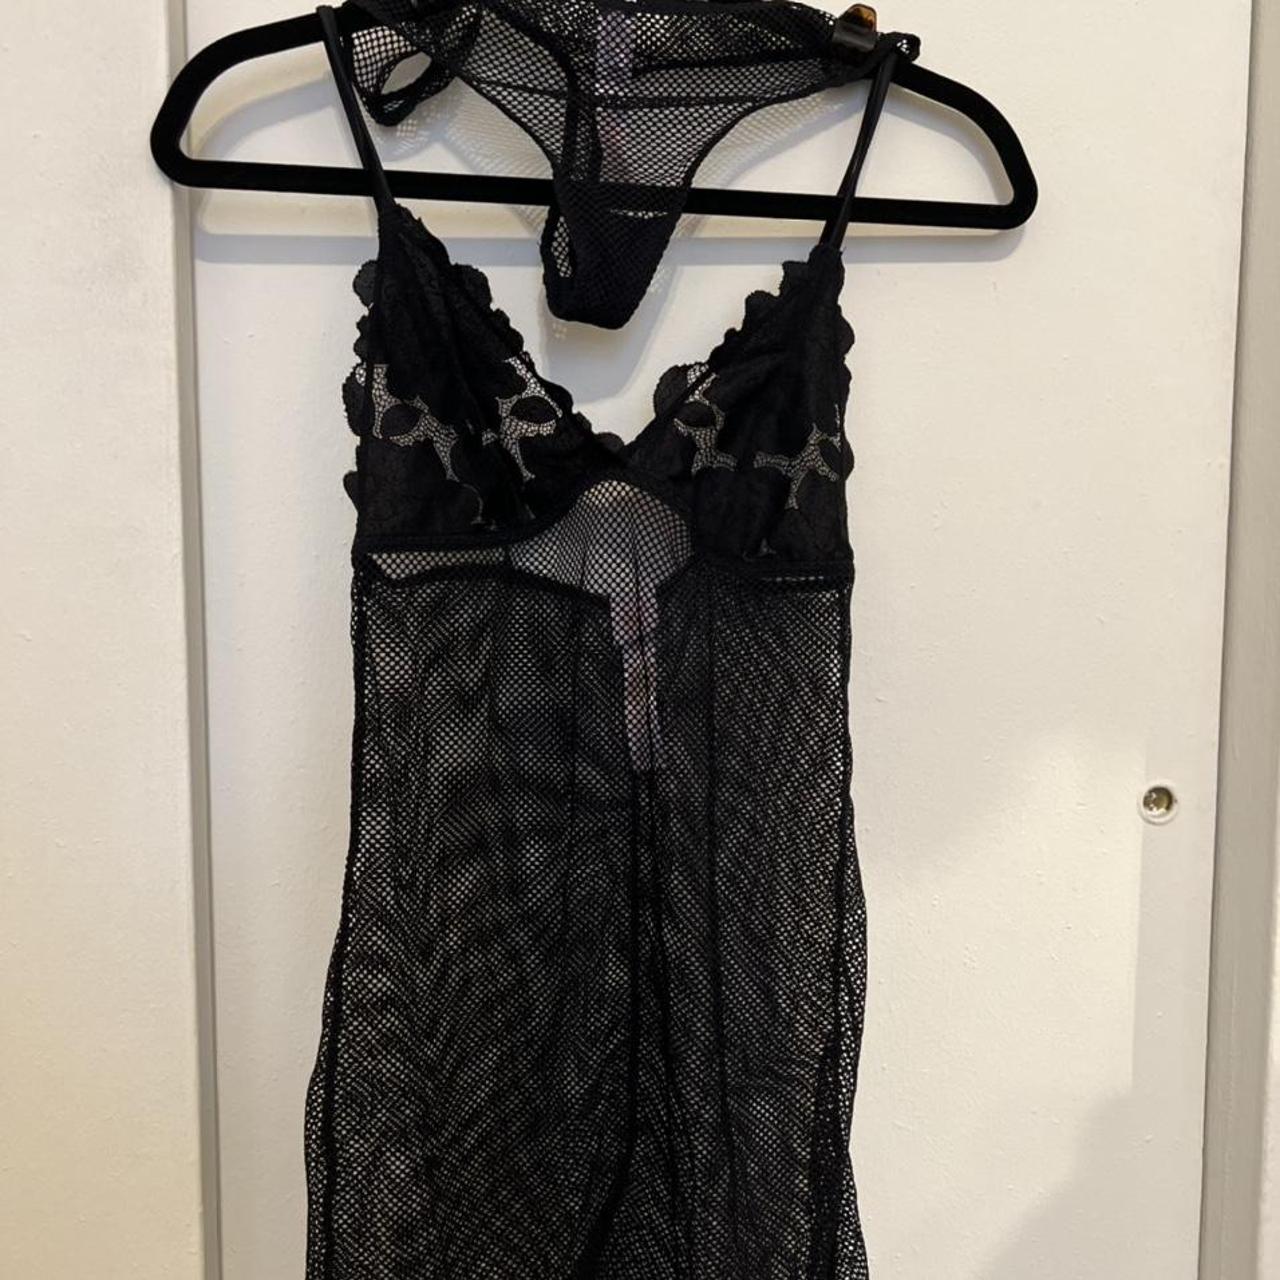 NWOT Savage x Fenty Floral Glow and lace mesh slip